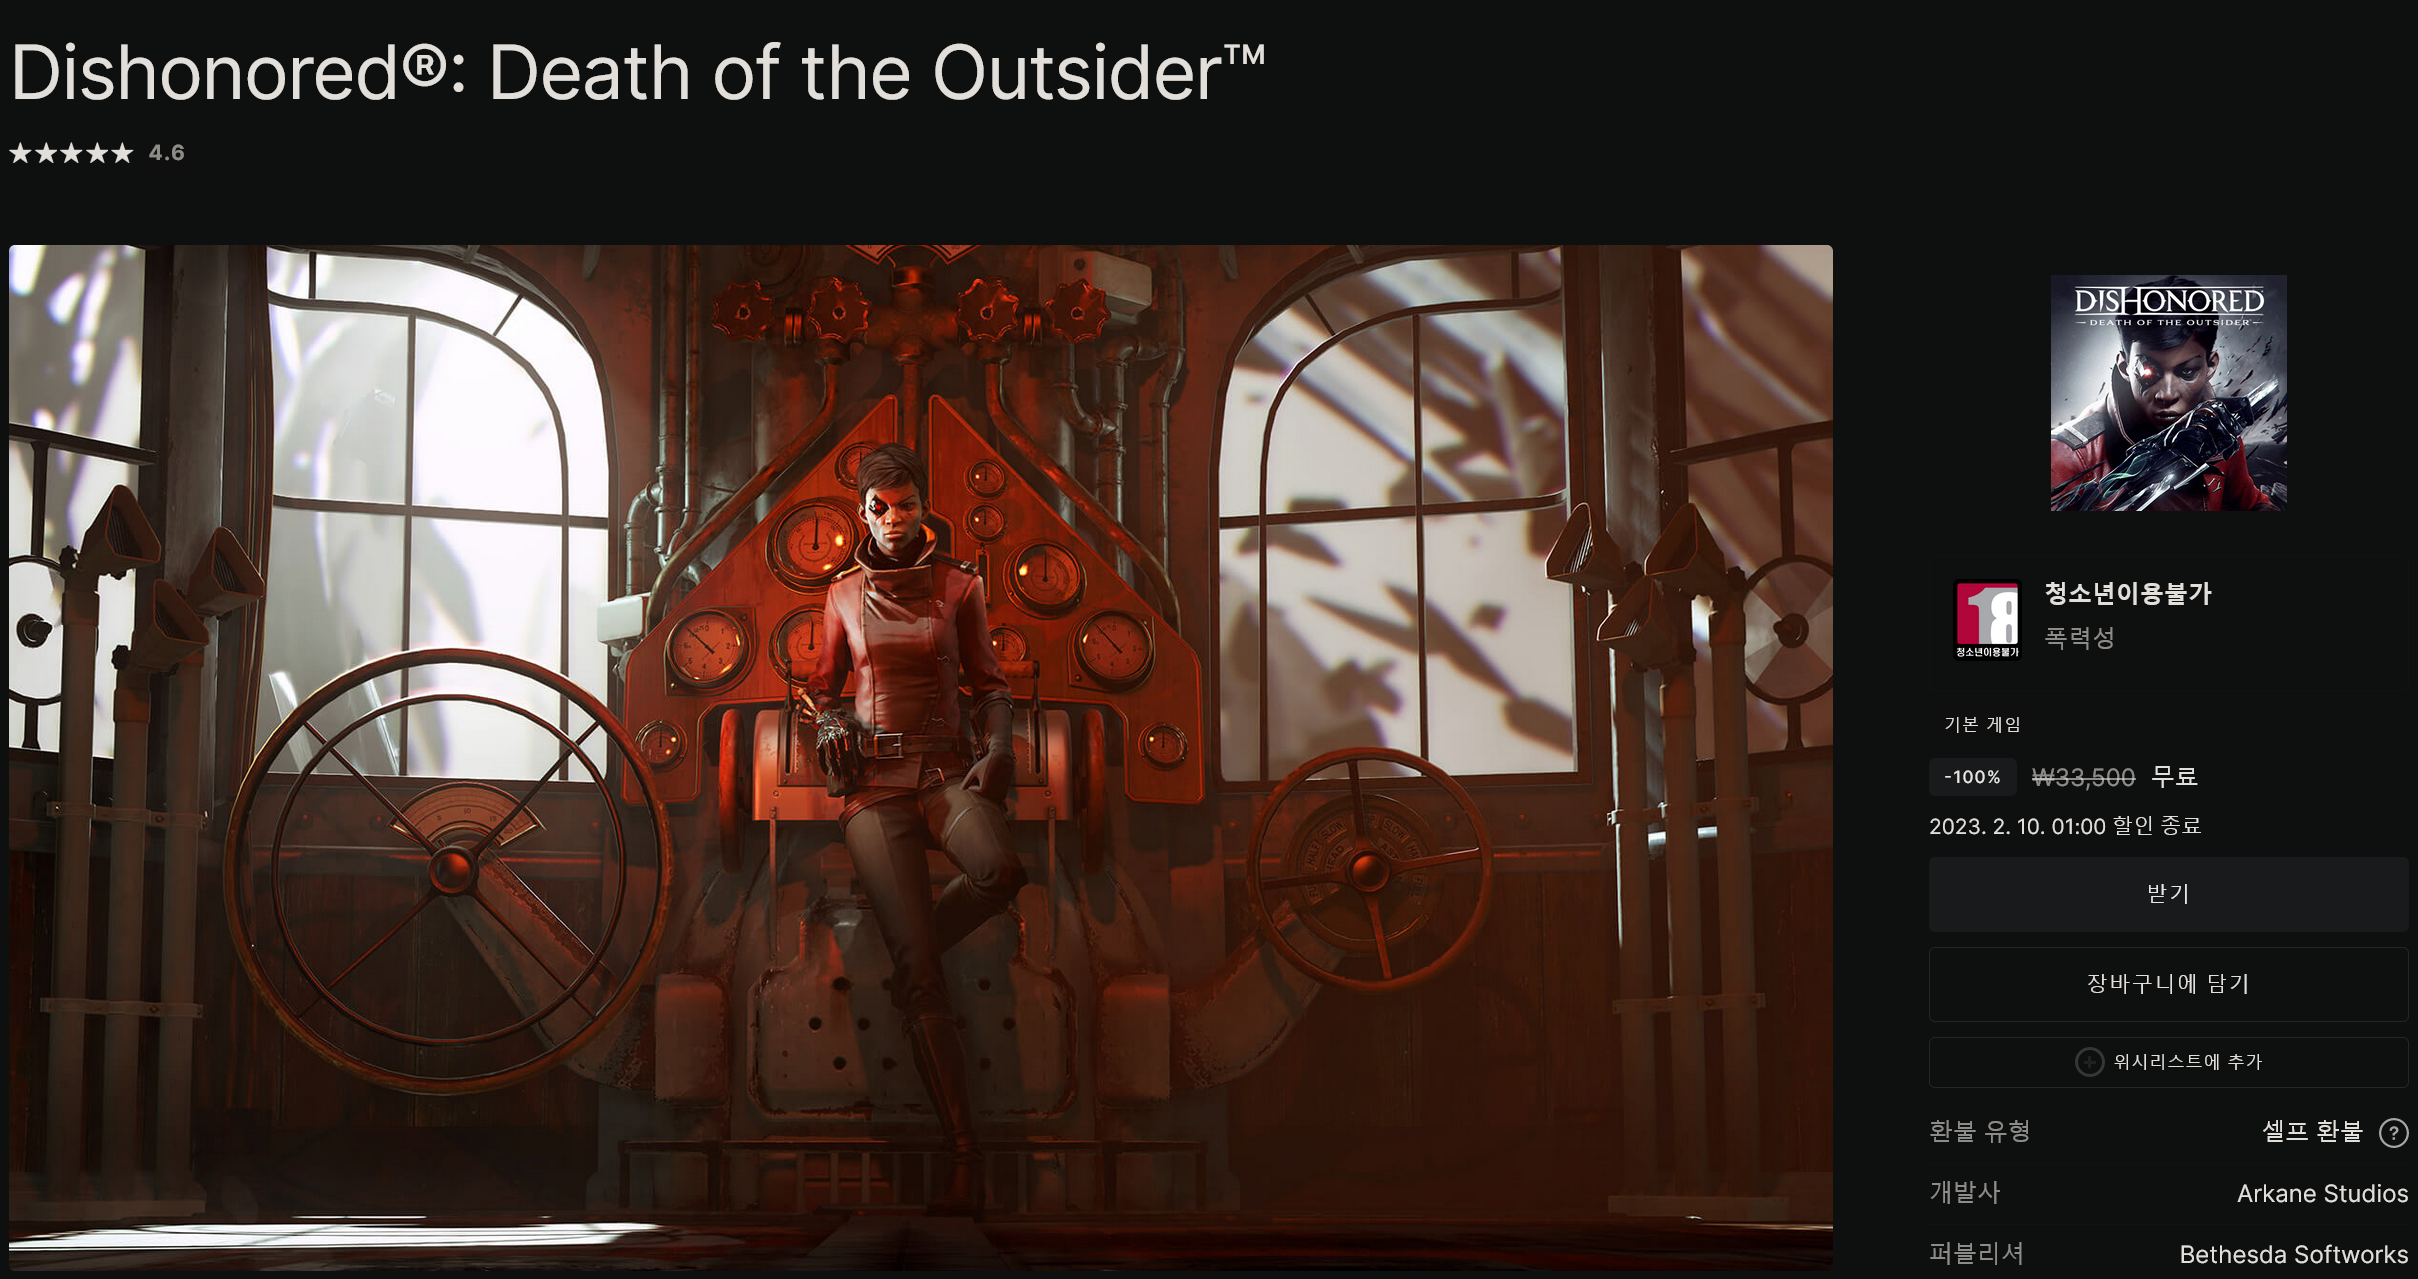 Screenshot 2023-02-03 at 01-02-13 Dishonored® Death of the Outsider™ 오늘 다운로드 및 구매 - Epic Games Store.png